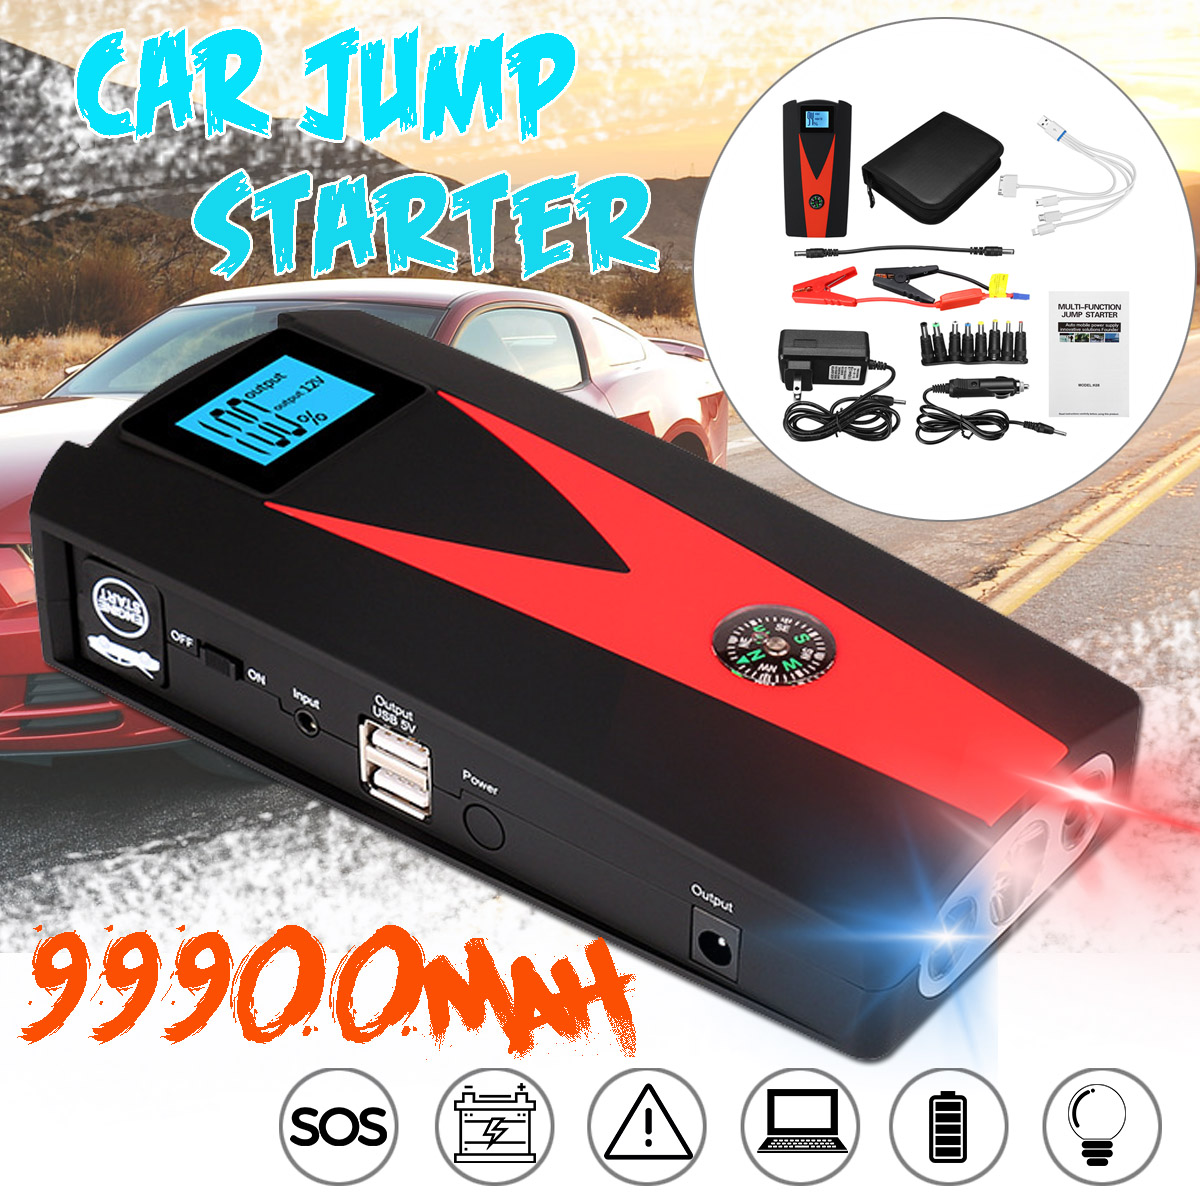 99900 mAh Dual USB Car Jump Starter LCD Auto Battery Booster Portable Power Pack with Jumper Cables